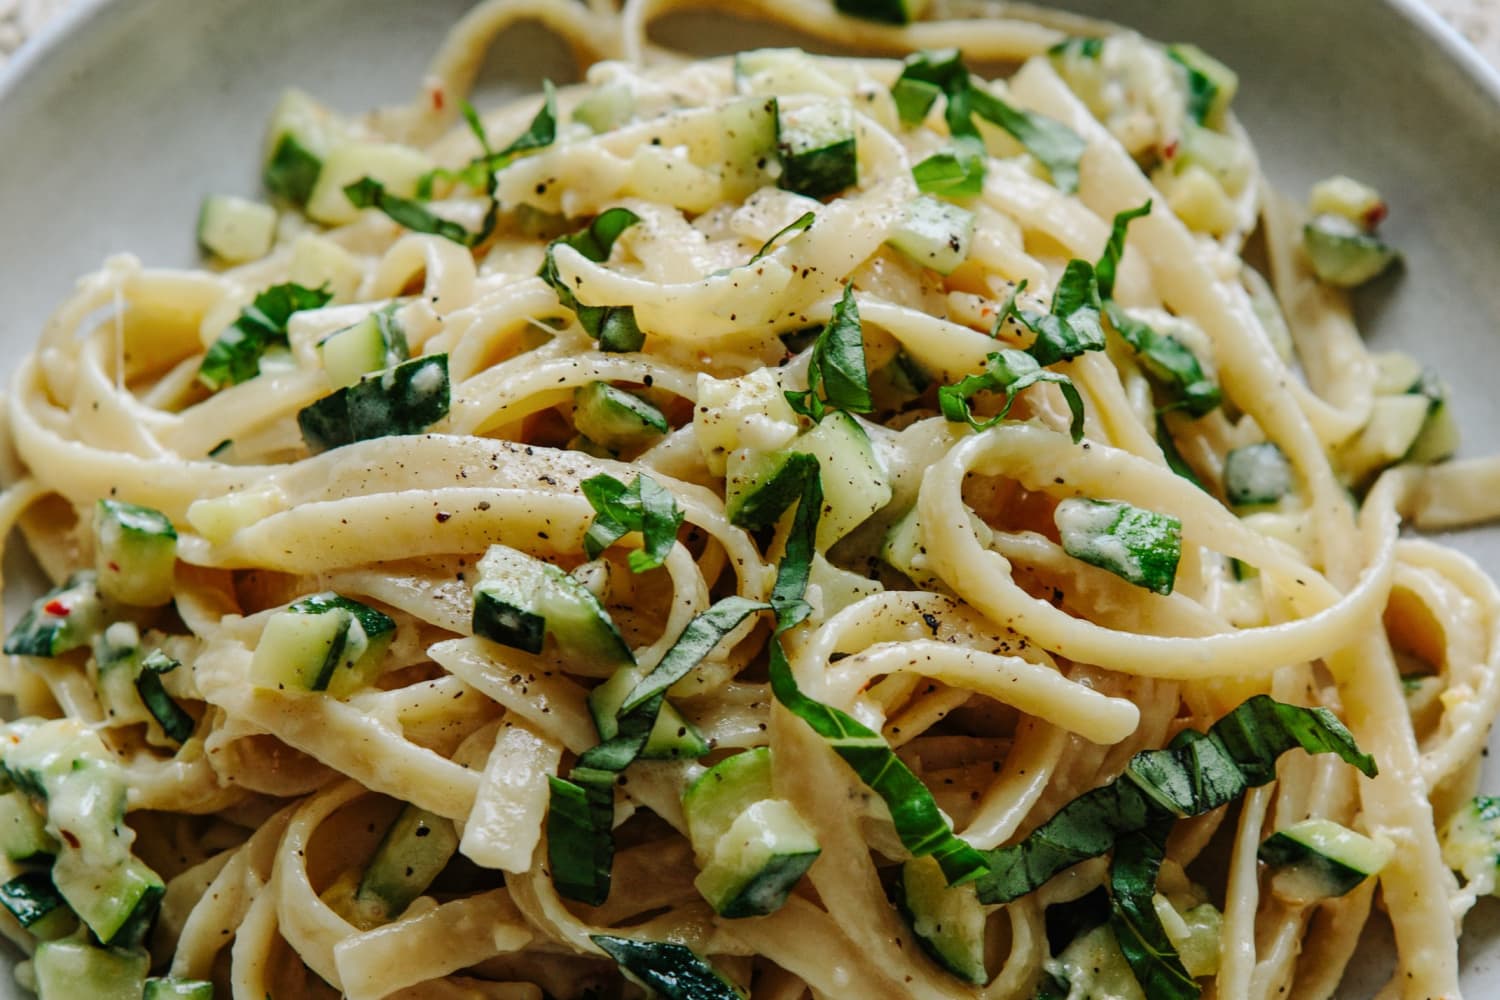 Creamy Zucchini Pasta Is So Good, You'll Want to Make It Every Night of Summer